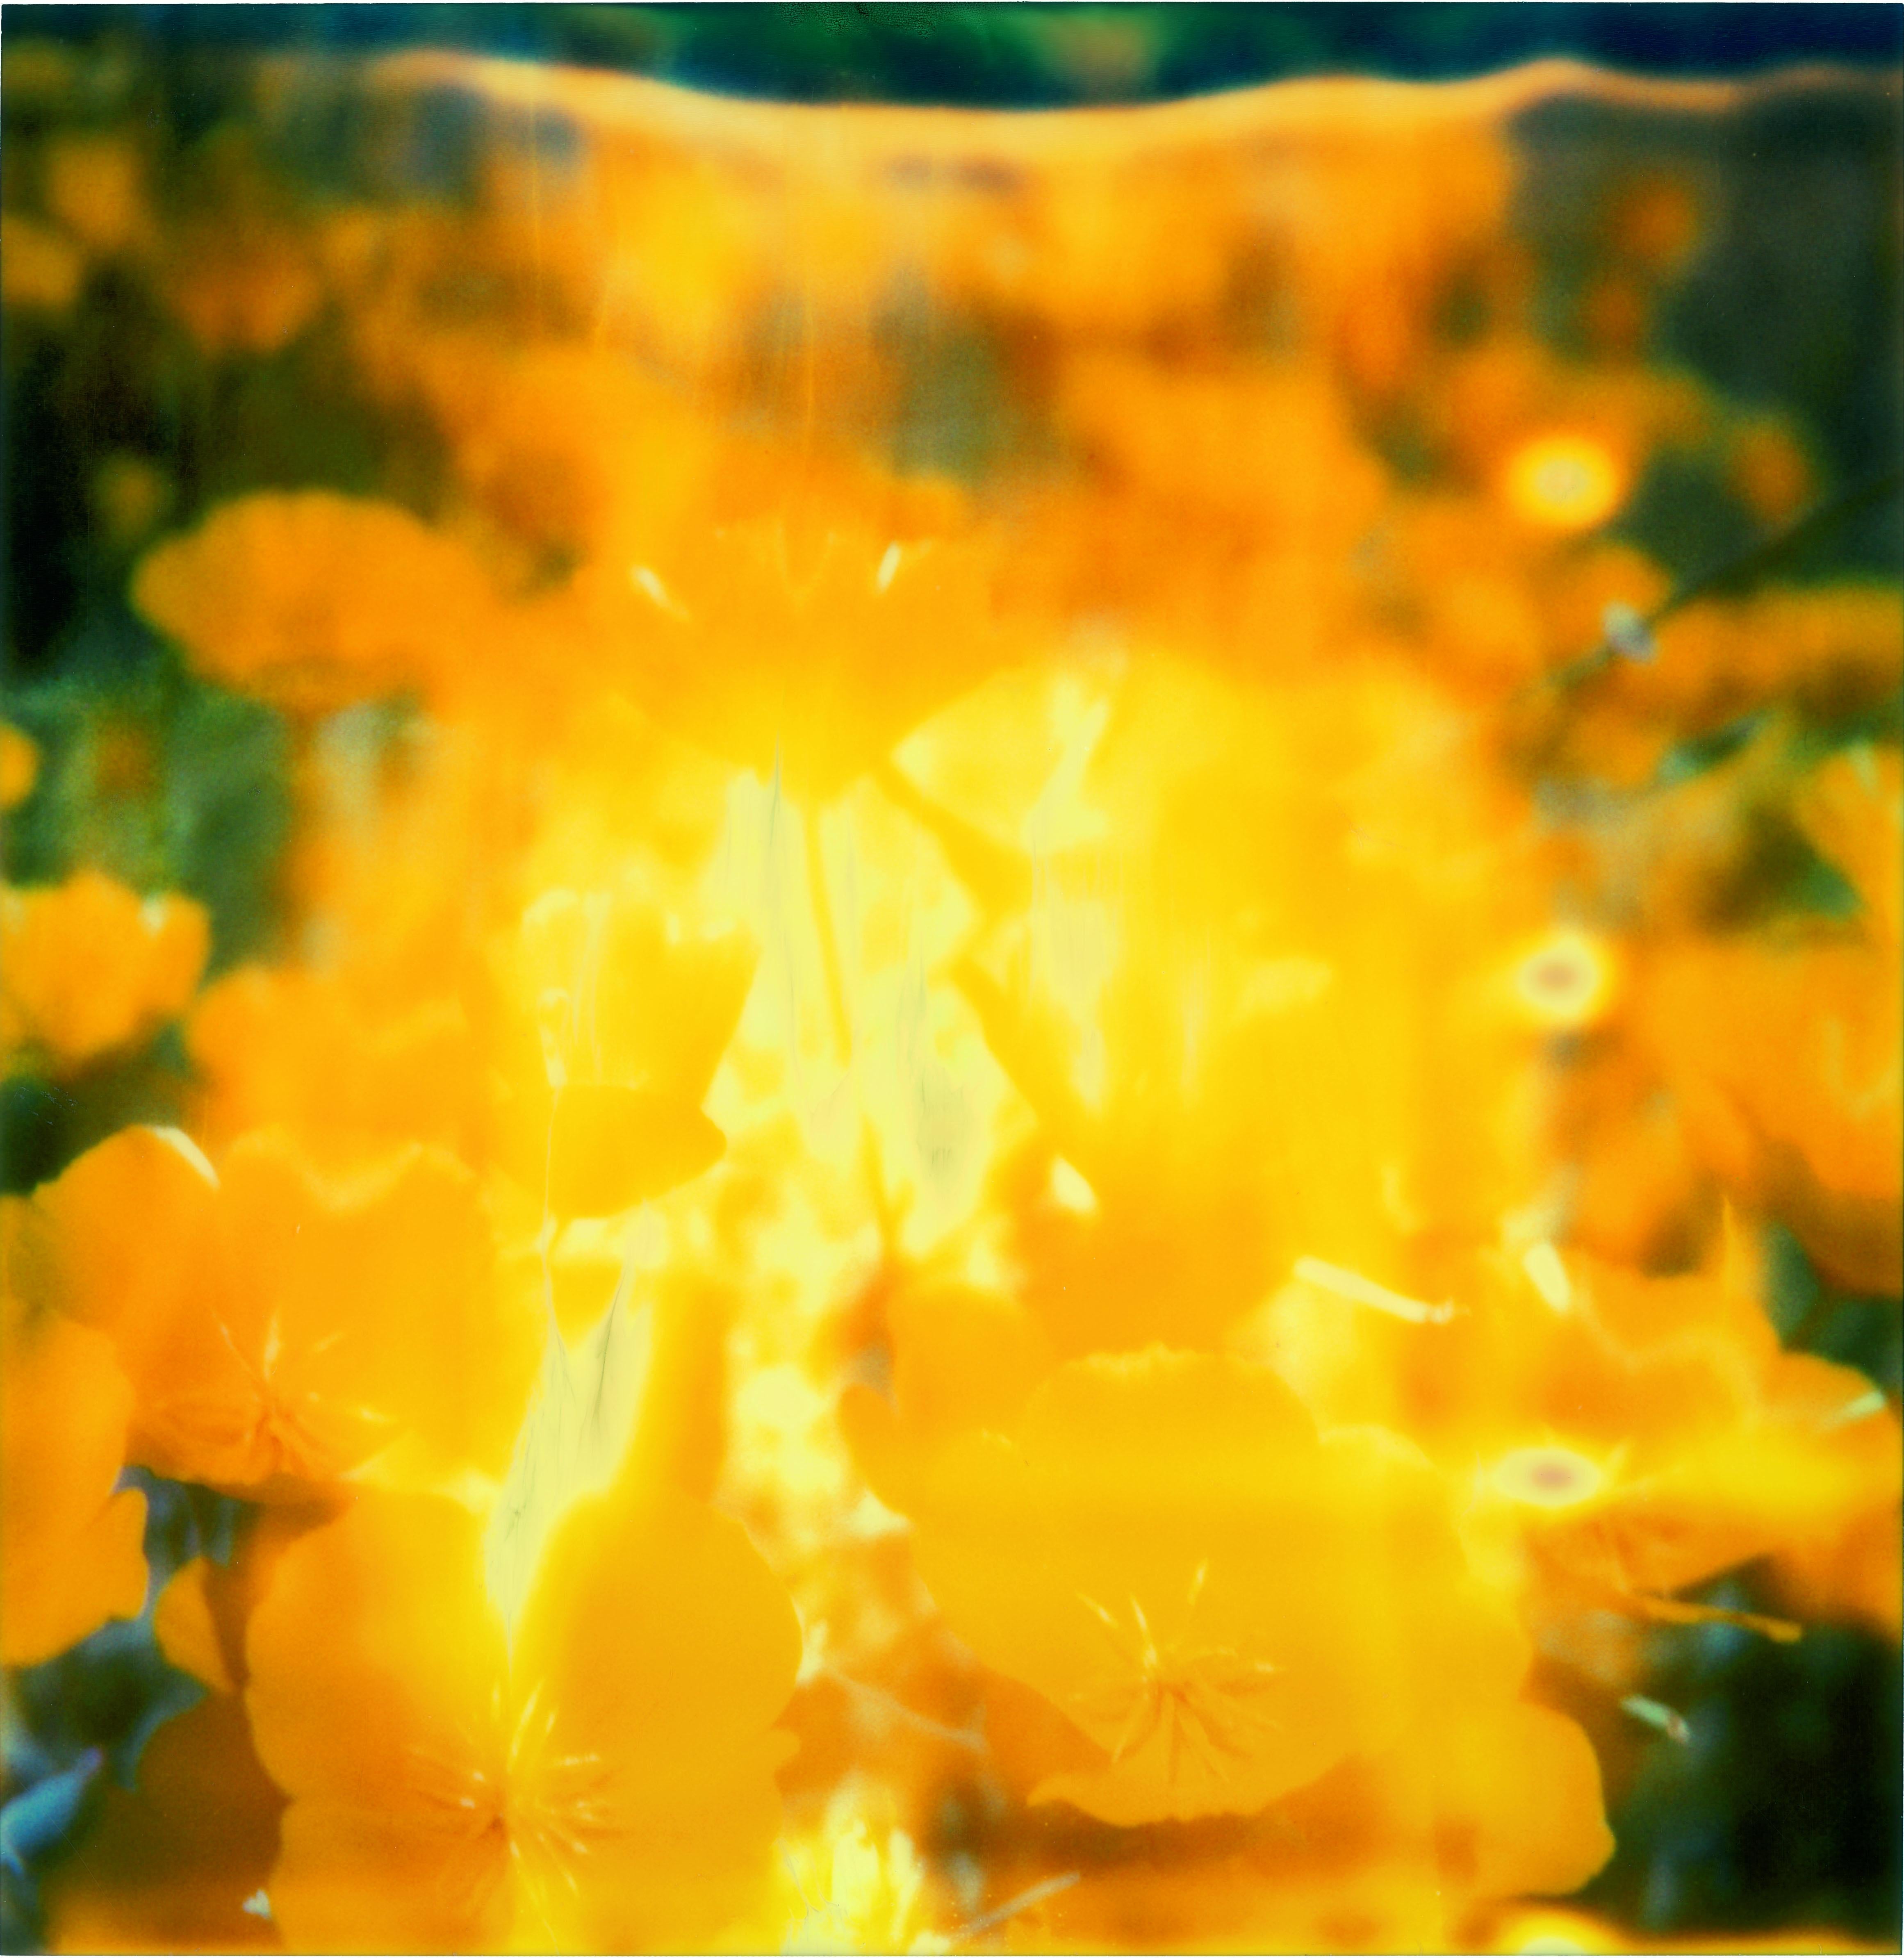 Stefanie Schneider Still-Life Photograph - Yellow Flower  - The Last Picture Show, analog, 128x126cm, not mounted